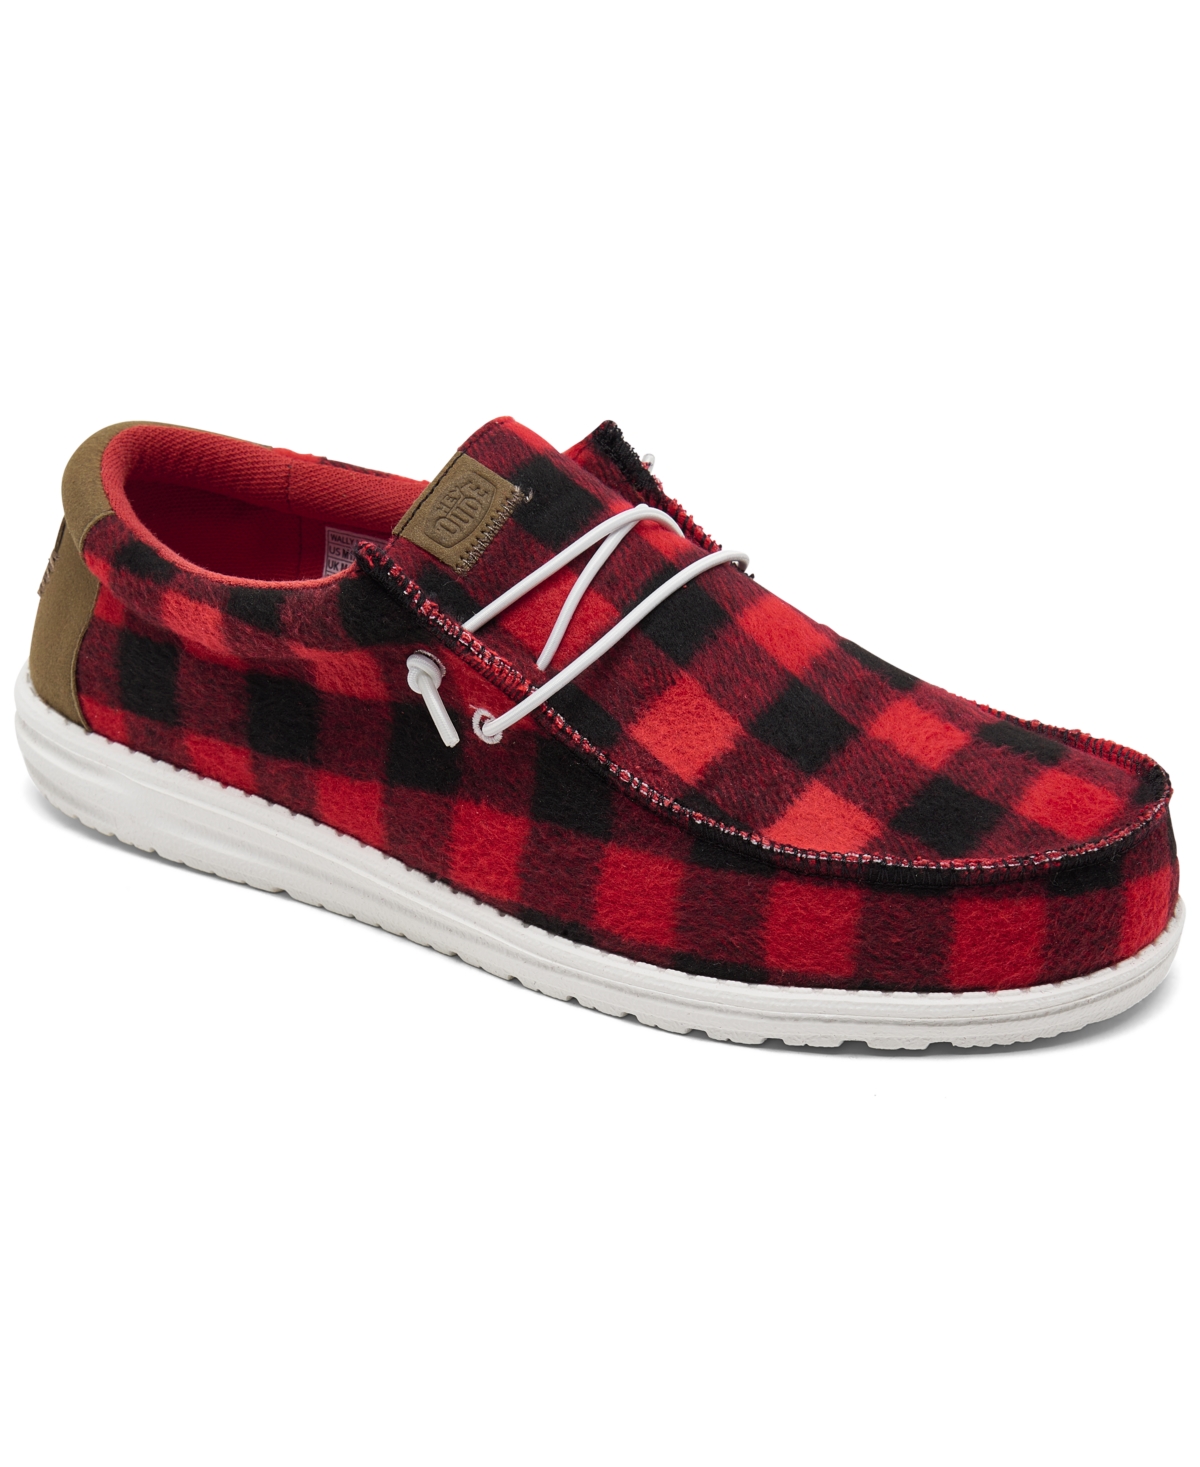 Men's Wally Casual Moccasin Sneakers from Finish Line - Red, Black